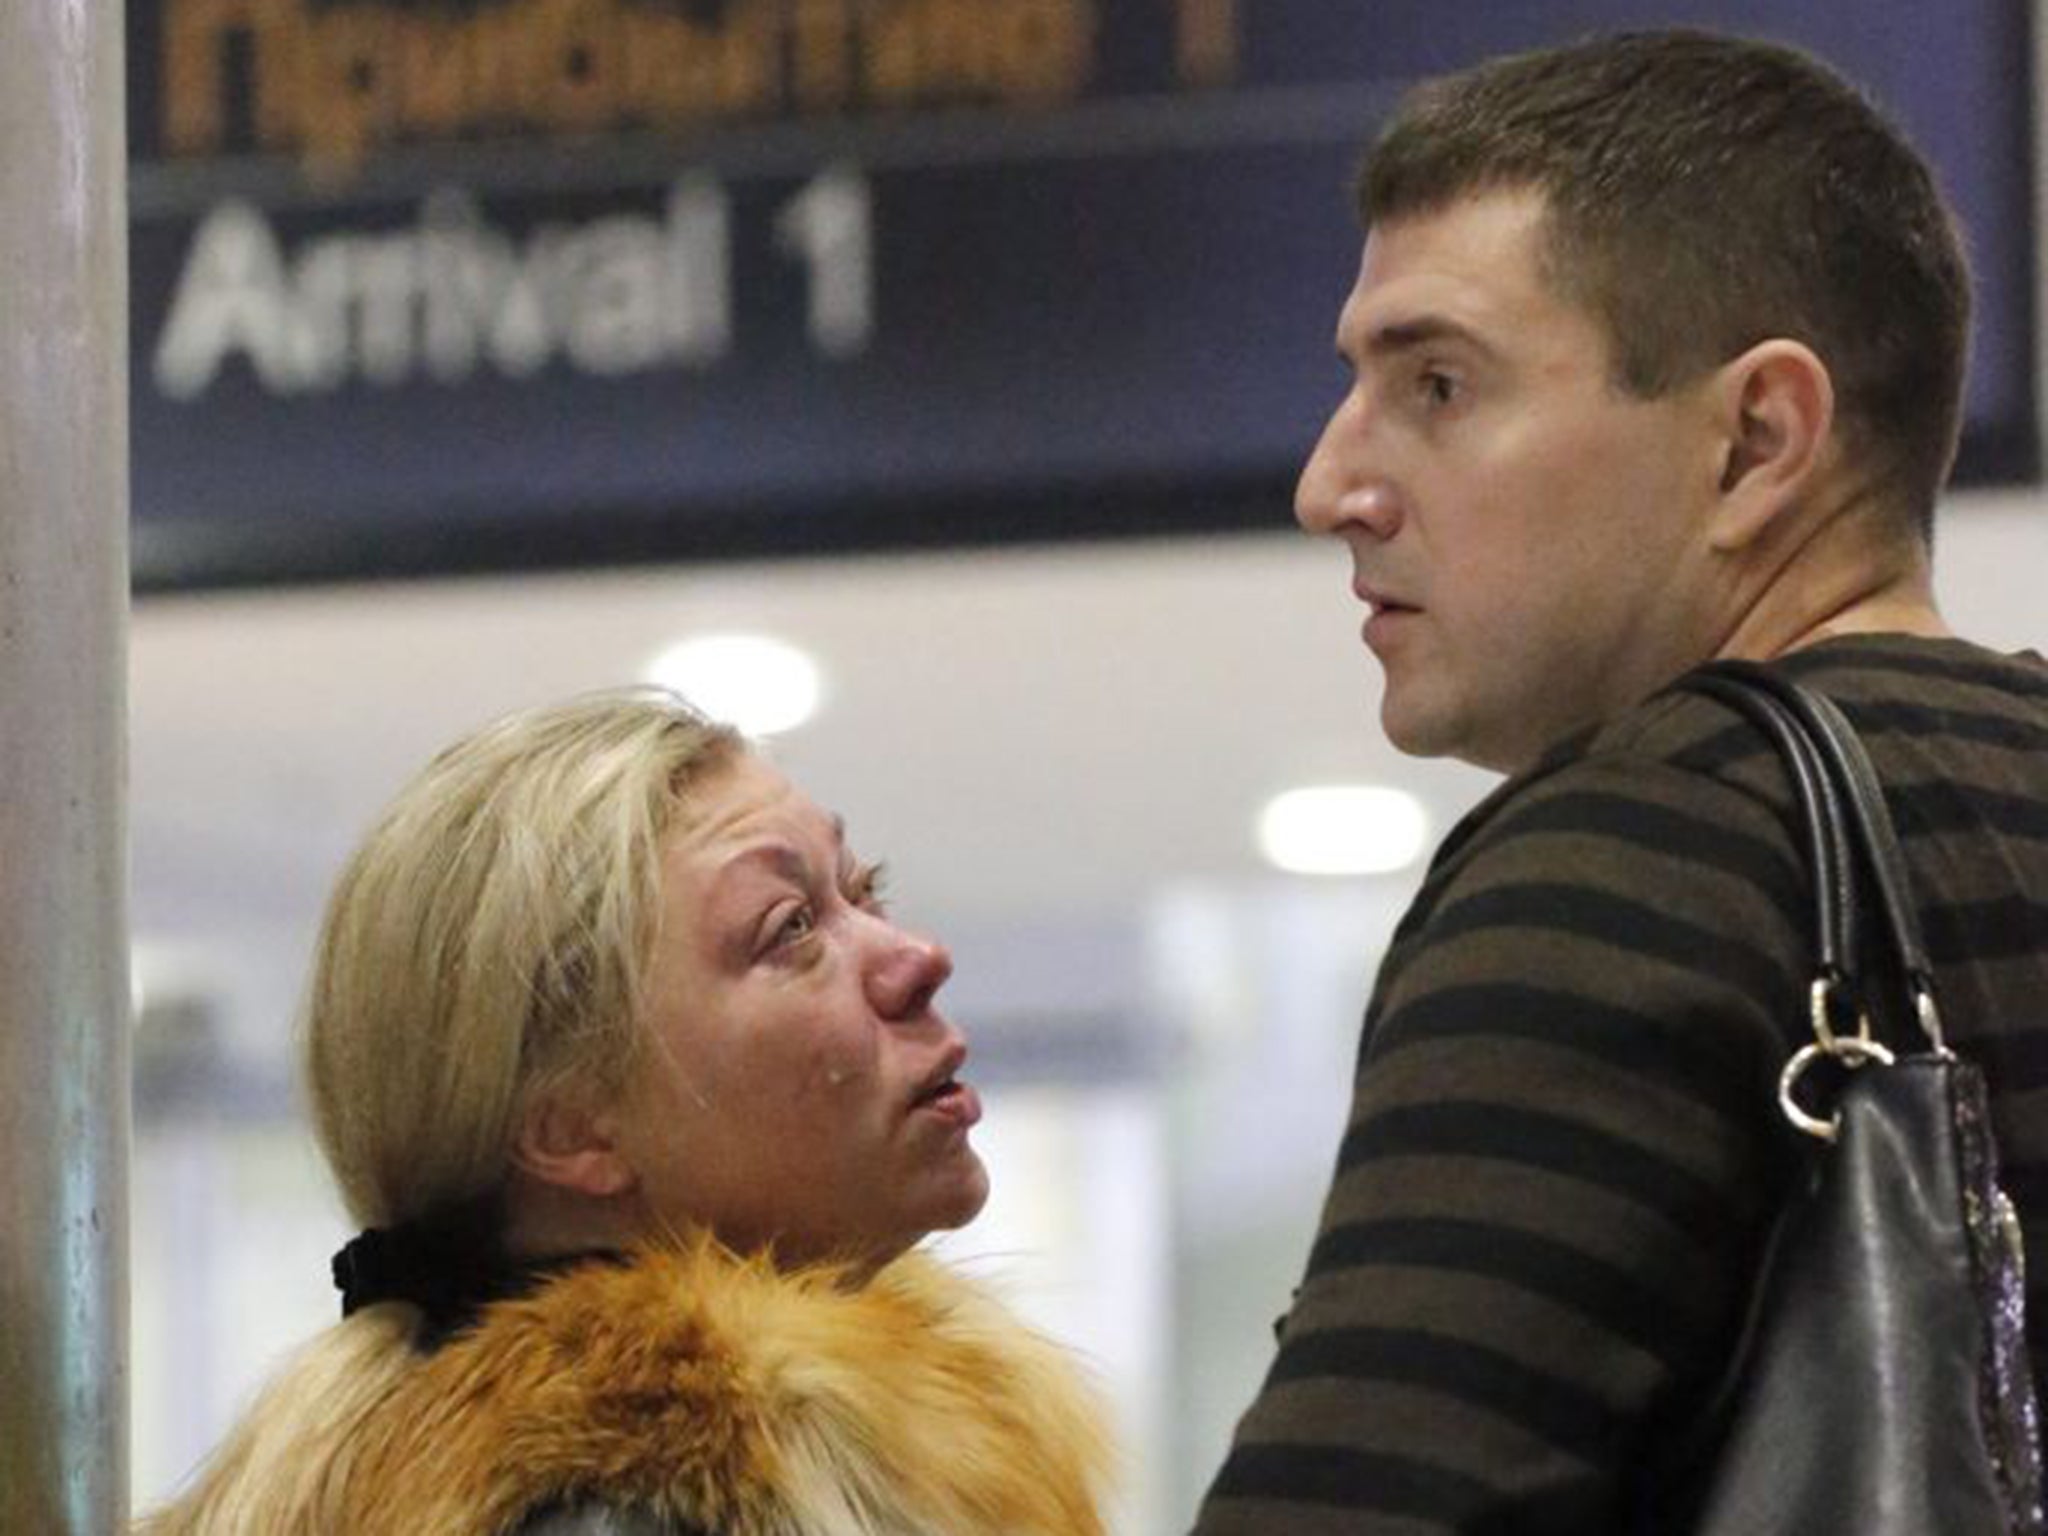 Shock in the arrivals hall at St Petersburg airport